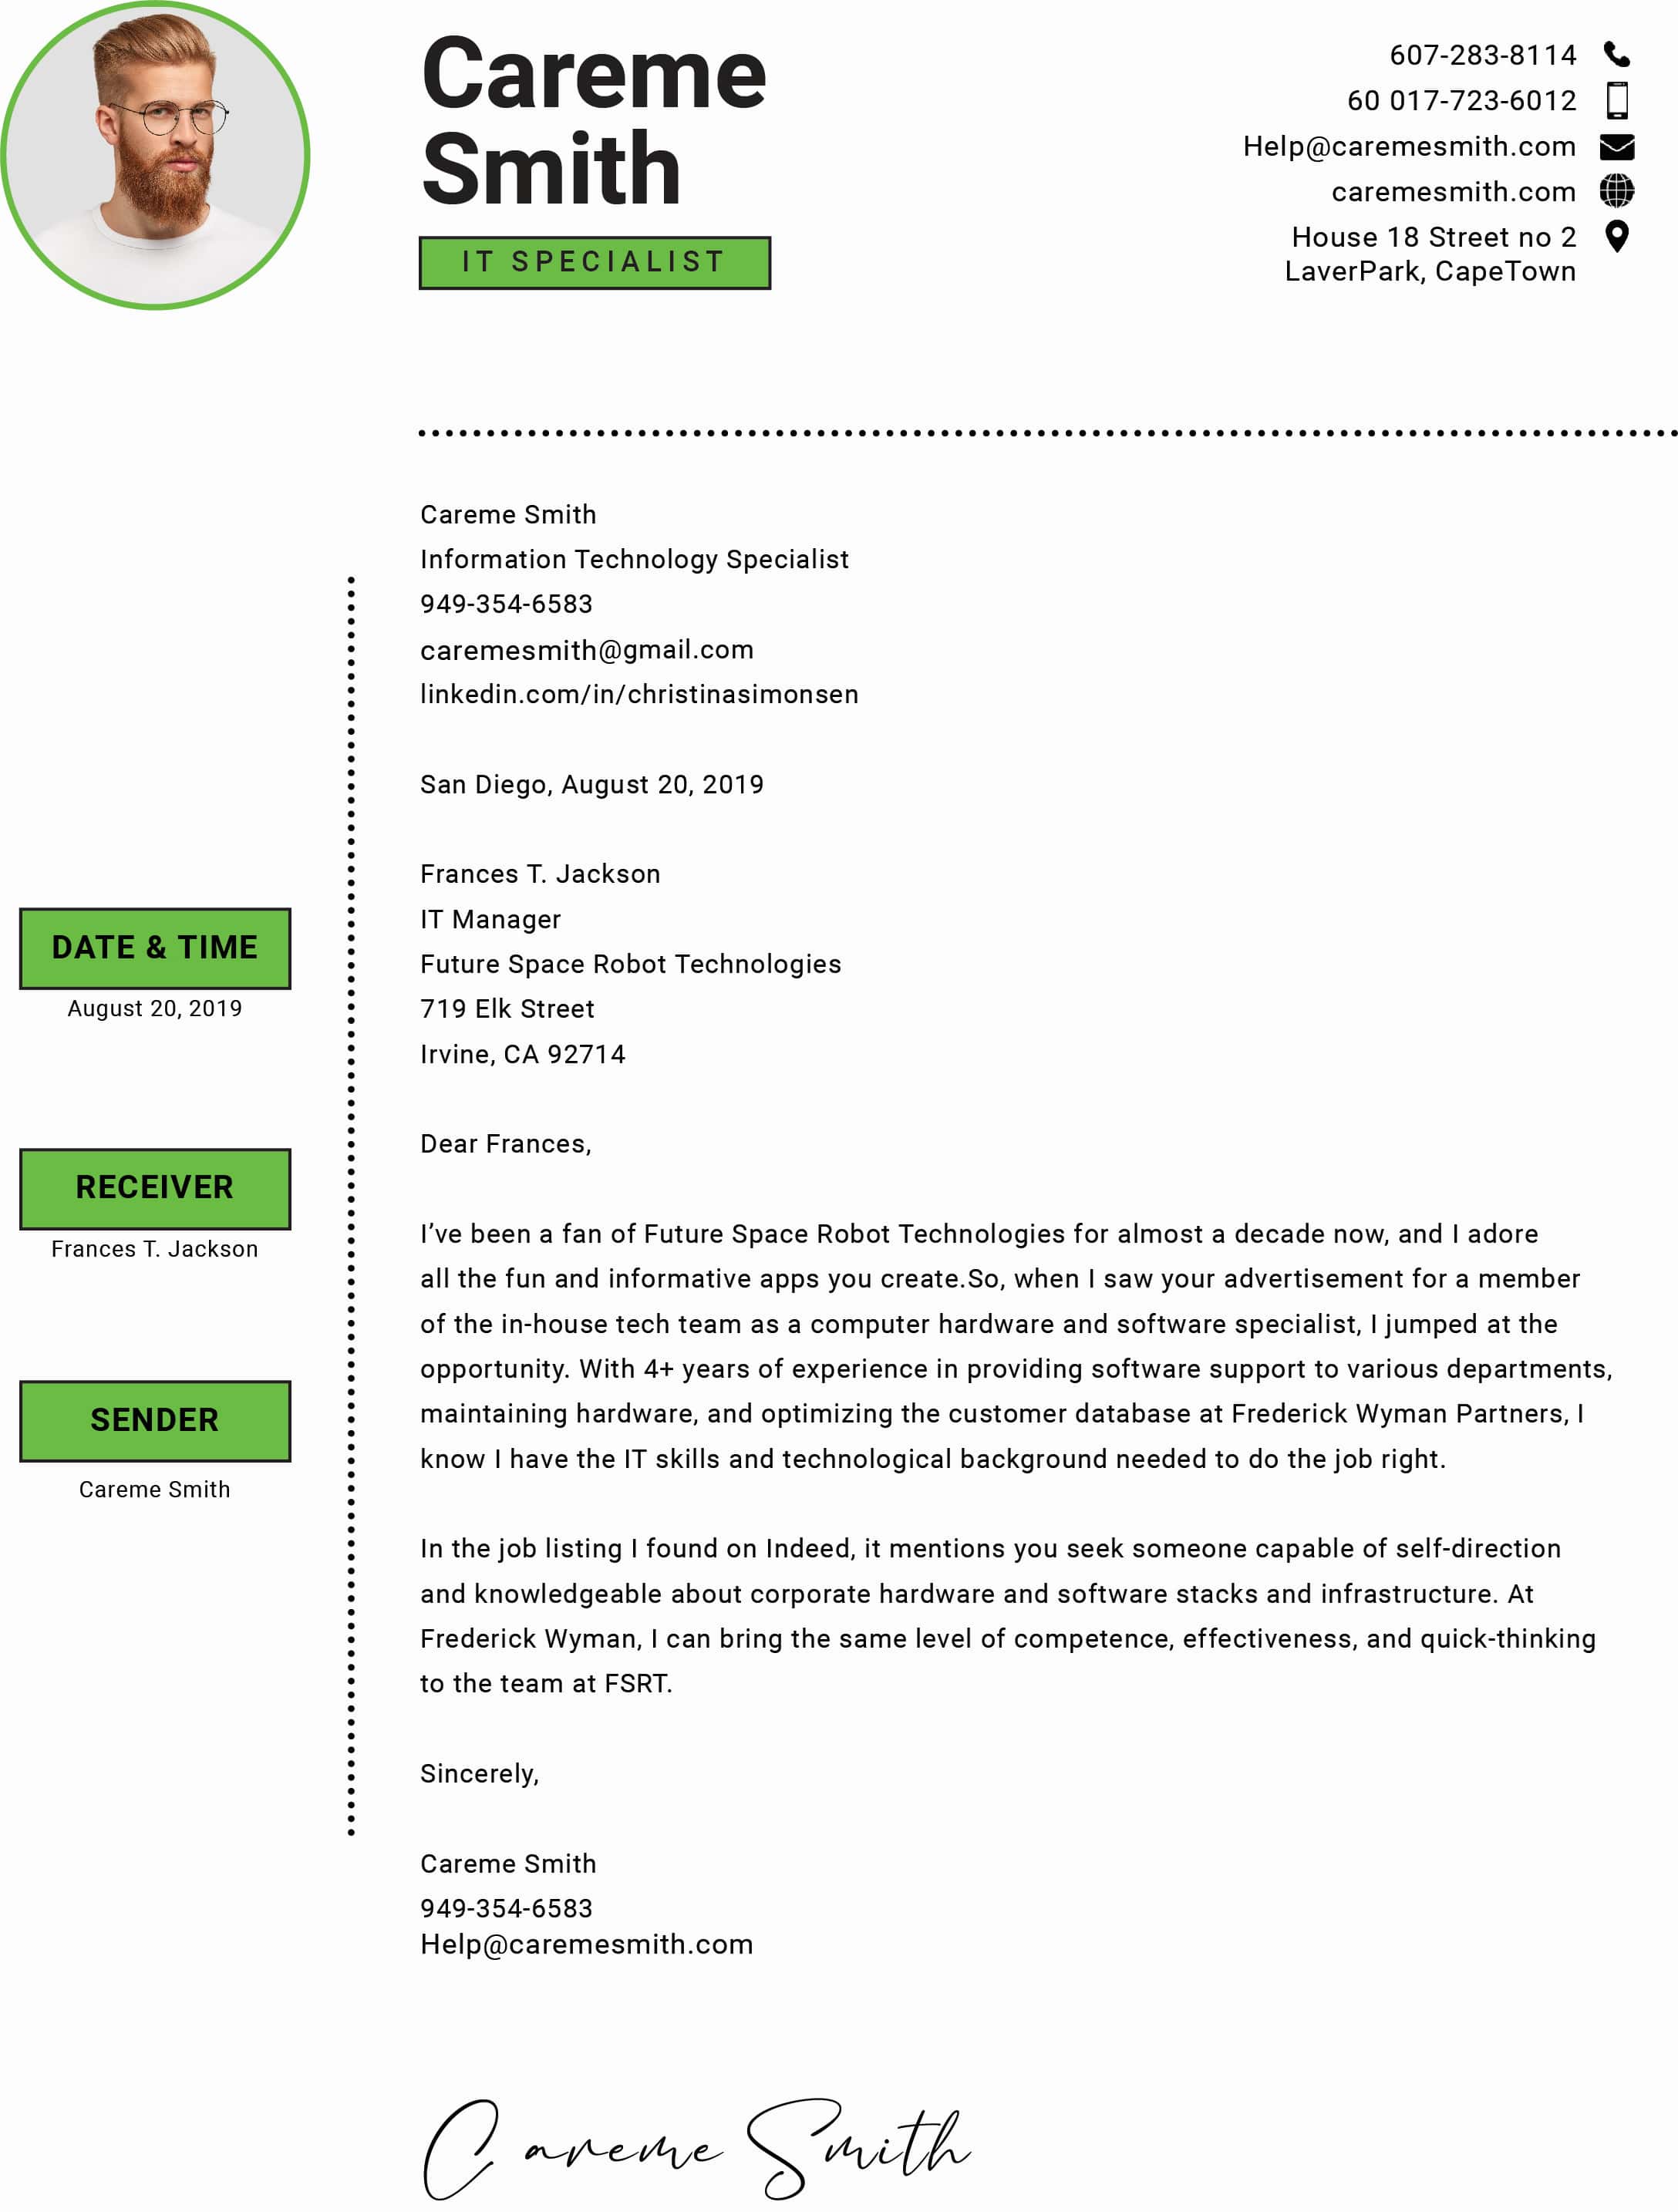 Green and white cover letter for a resume.